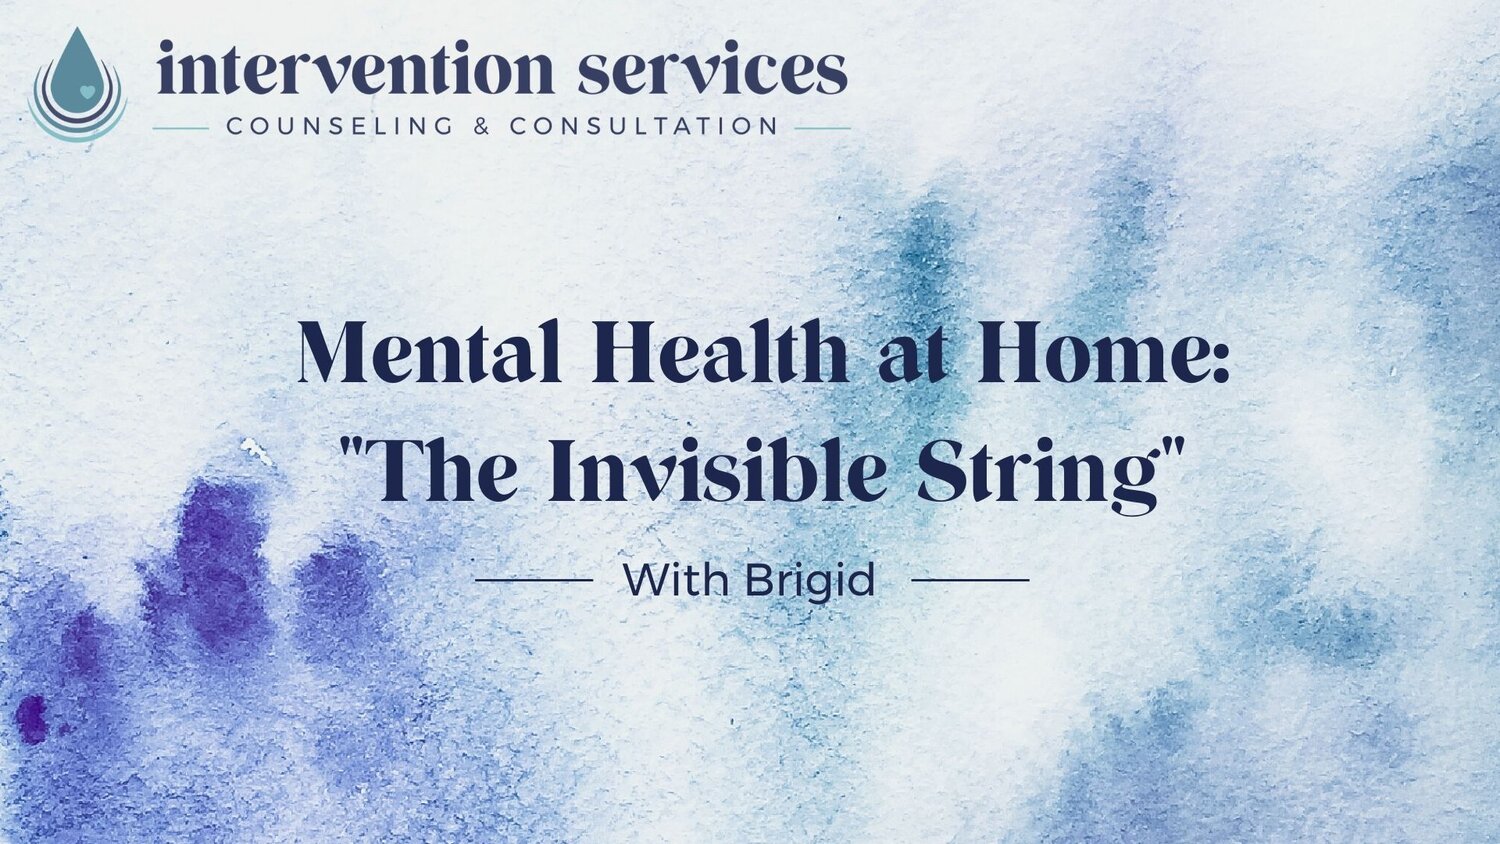 The Invisible String — Impact Counseling Services